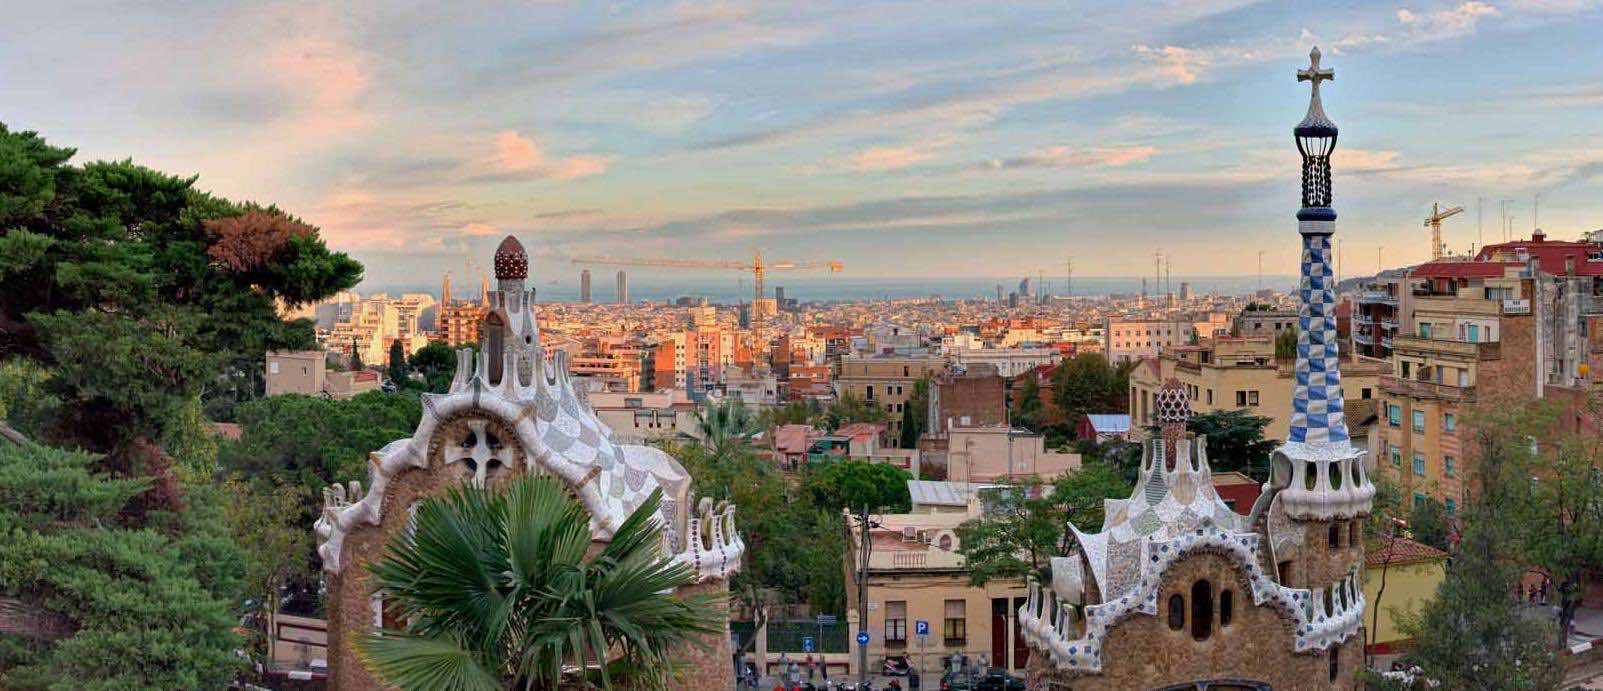 Barcelona City Wallpapers: HD Wallpapers for Desktop And Mob